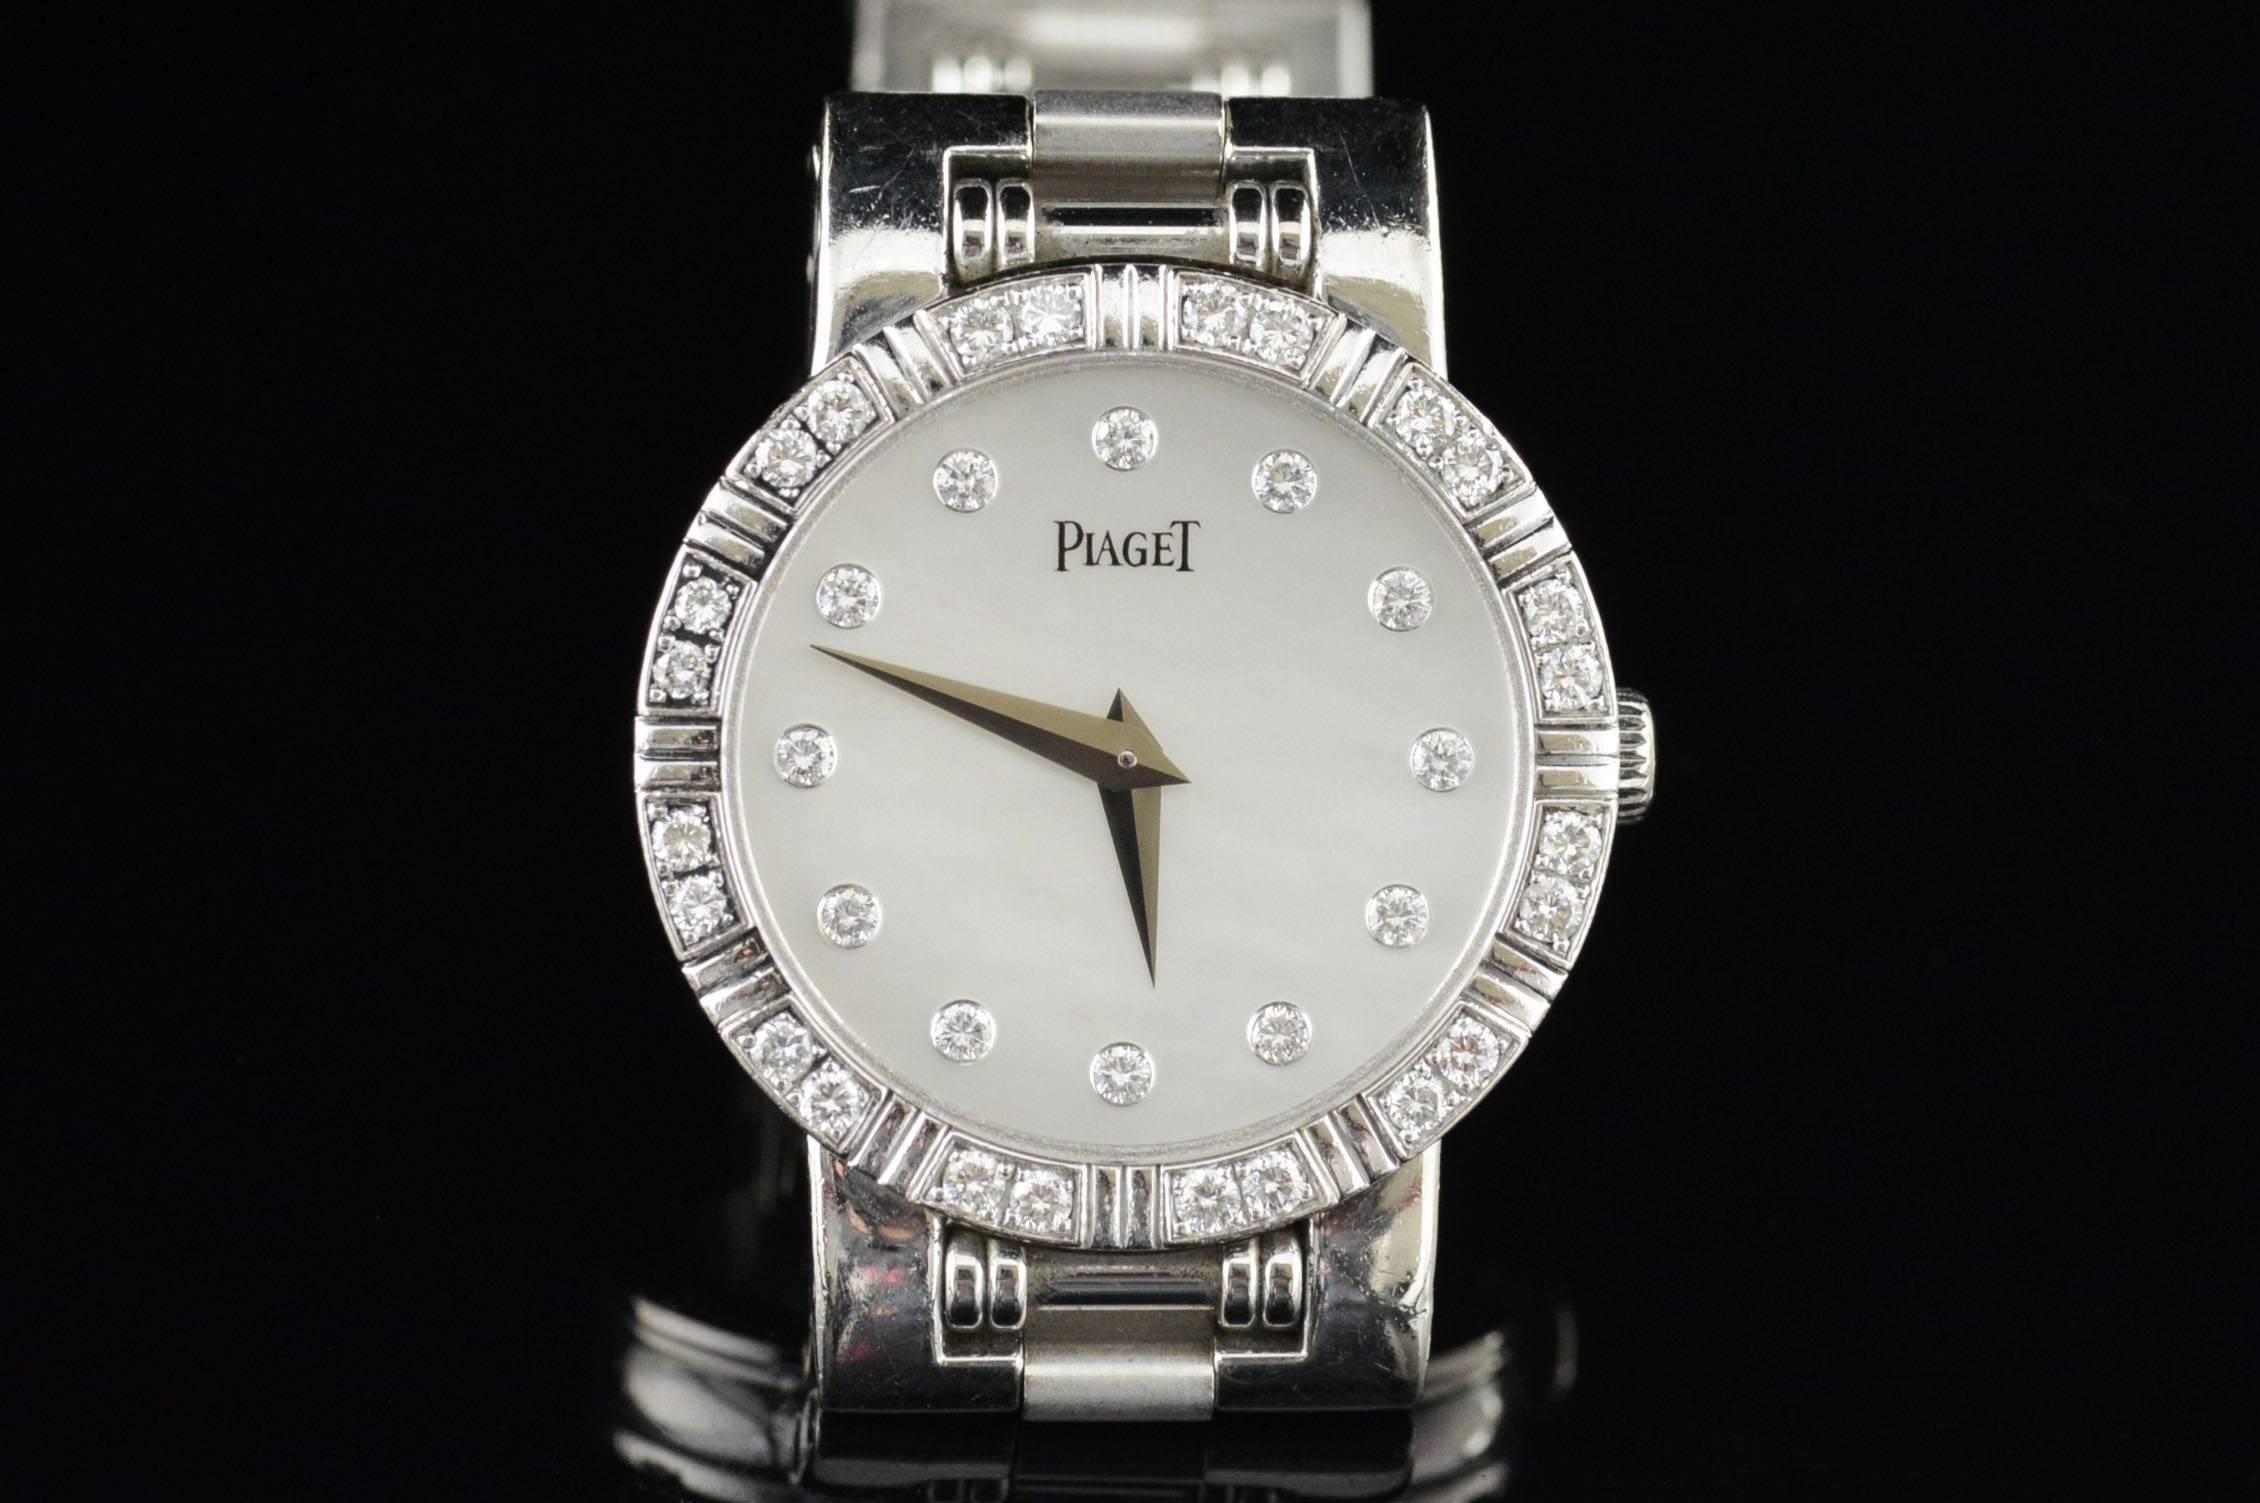 ·Item: Piaget Diamond Encrusted Dancer

·Composition: 18k Gold Marked/Tested

·Condition: Estate: Watch Runs and keeps time. Does not come with box or paperwork.

·Weight: 59.4g
Face 24mm 
Links can be removed for sizing. 
